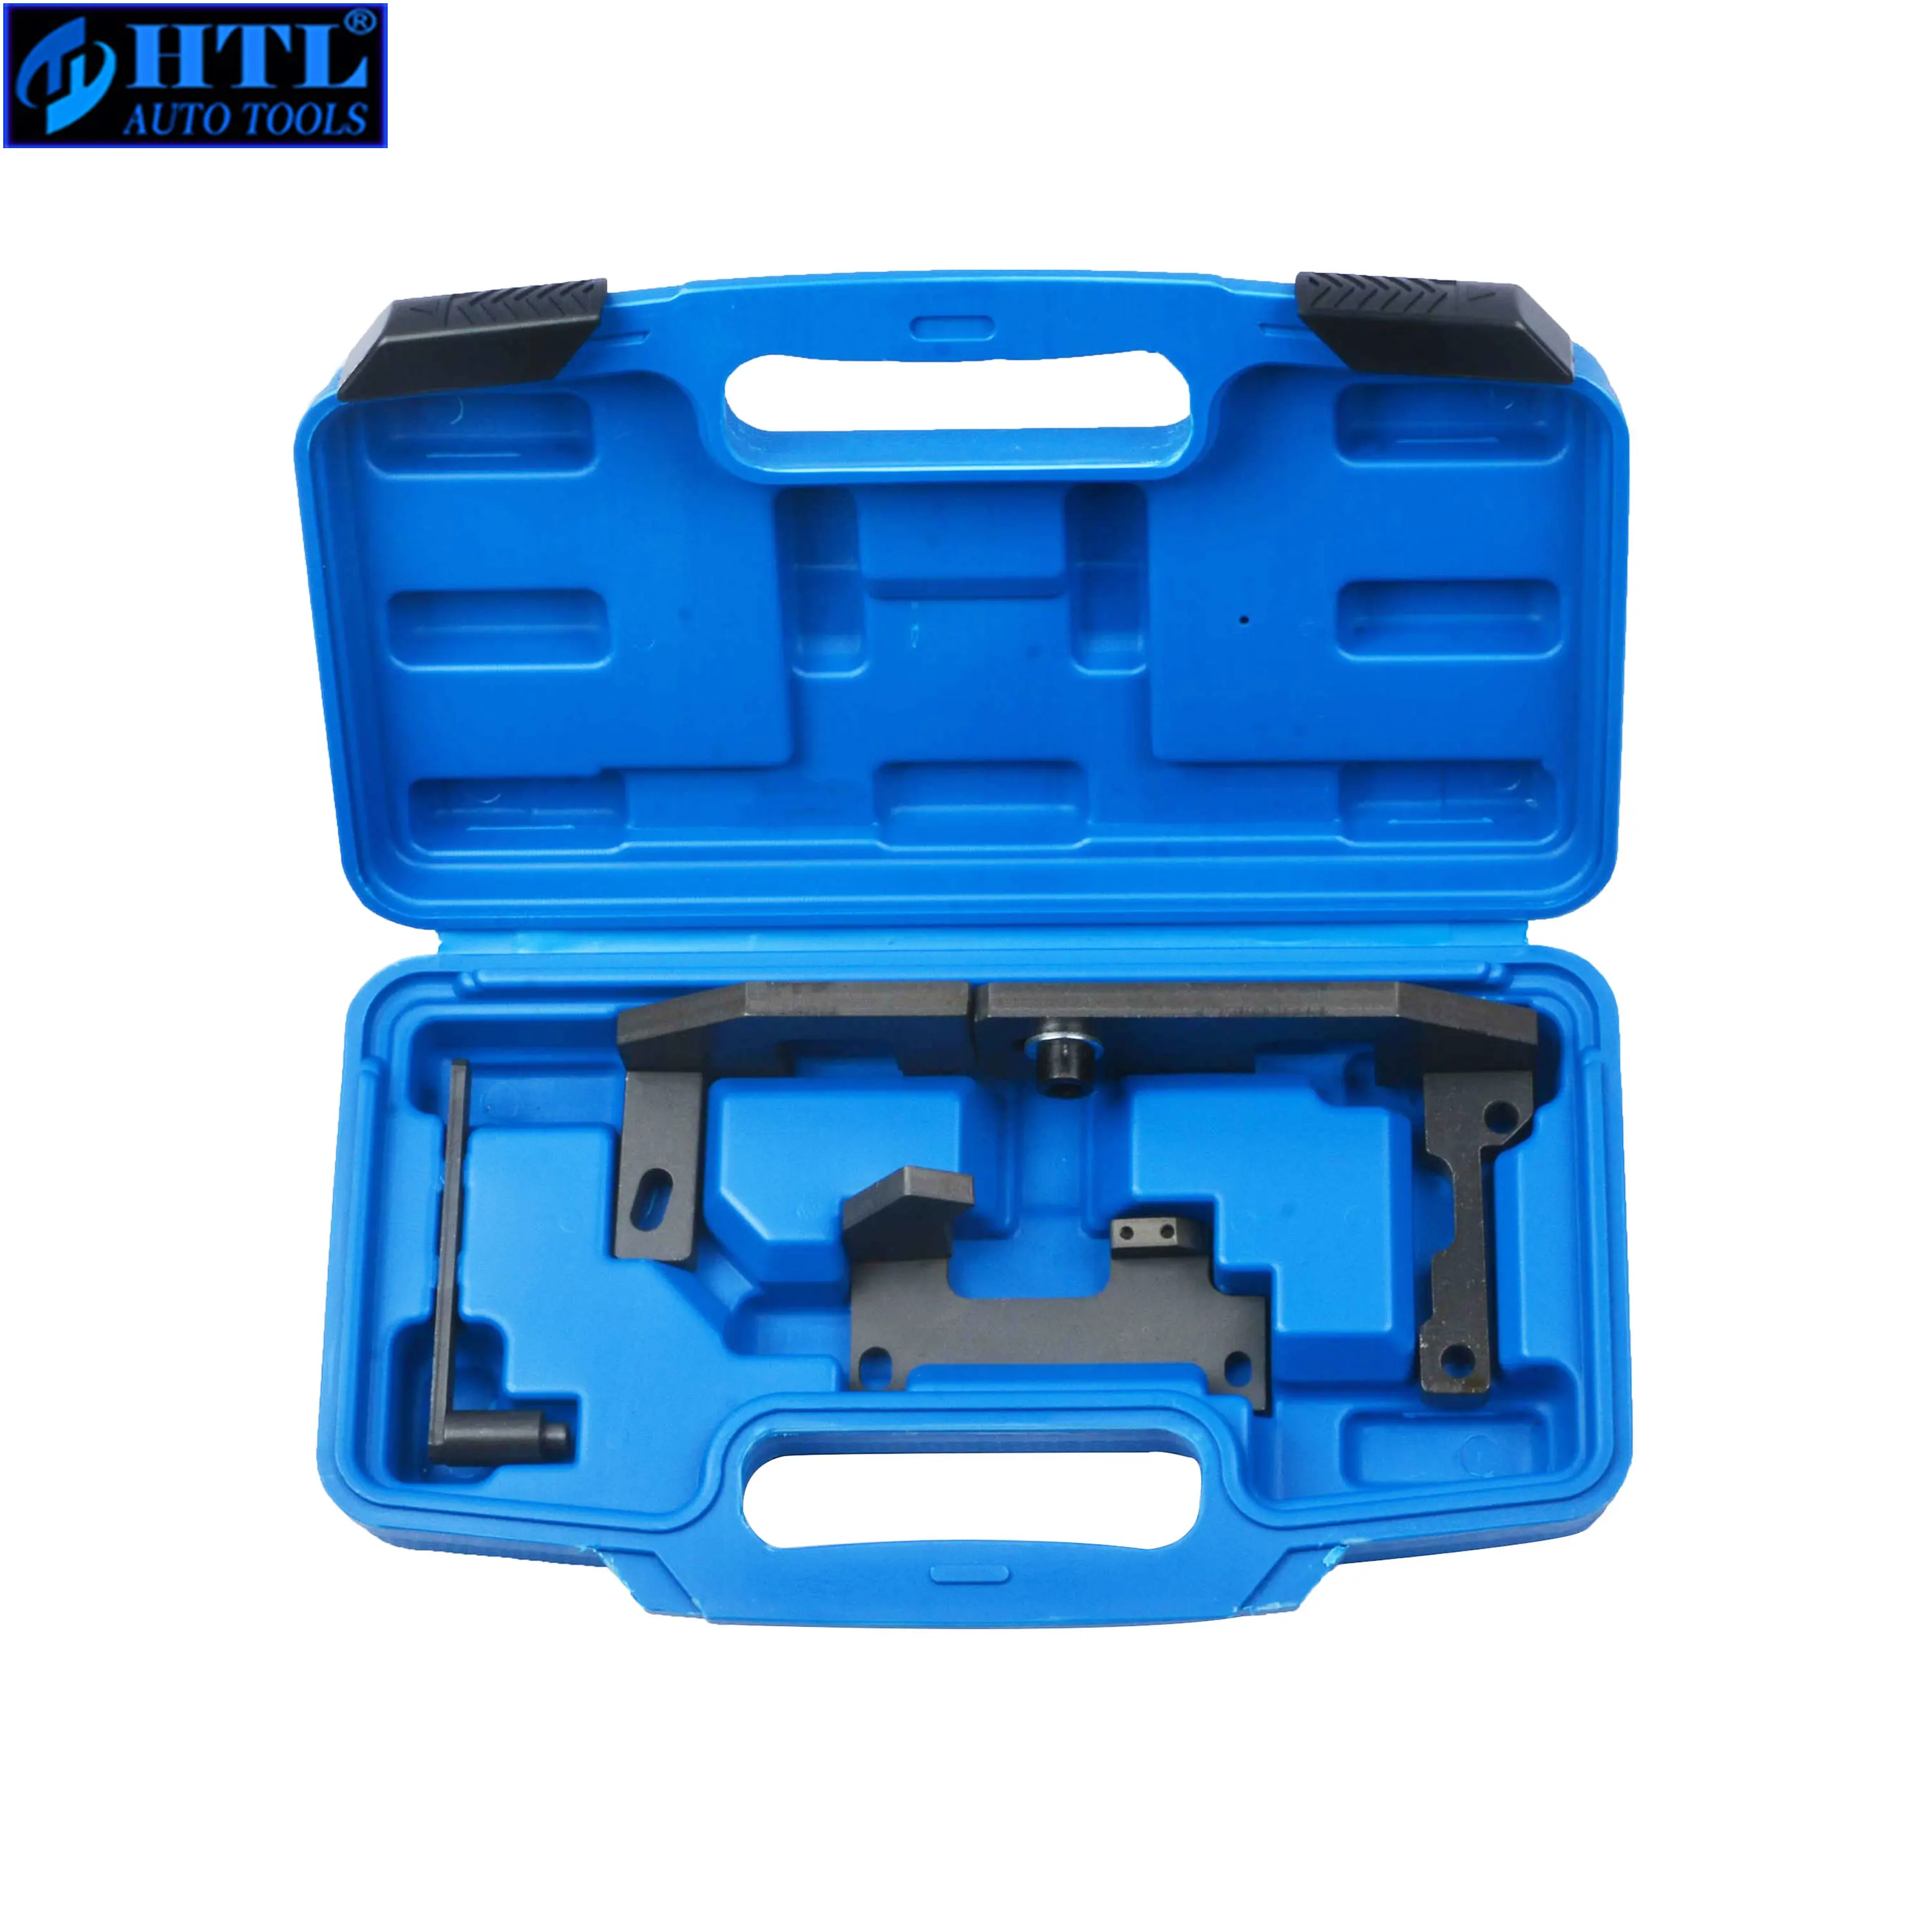 DR TOOLS for CITROEN PEUGEOT 1.0 1.2 VTI 0109-2 A-RCPS3 TIMING TOOL CAMSHAFT LOCKING ENGINE 